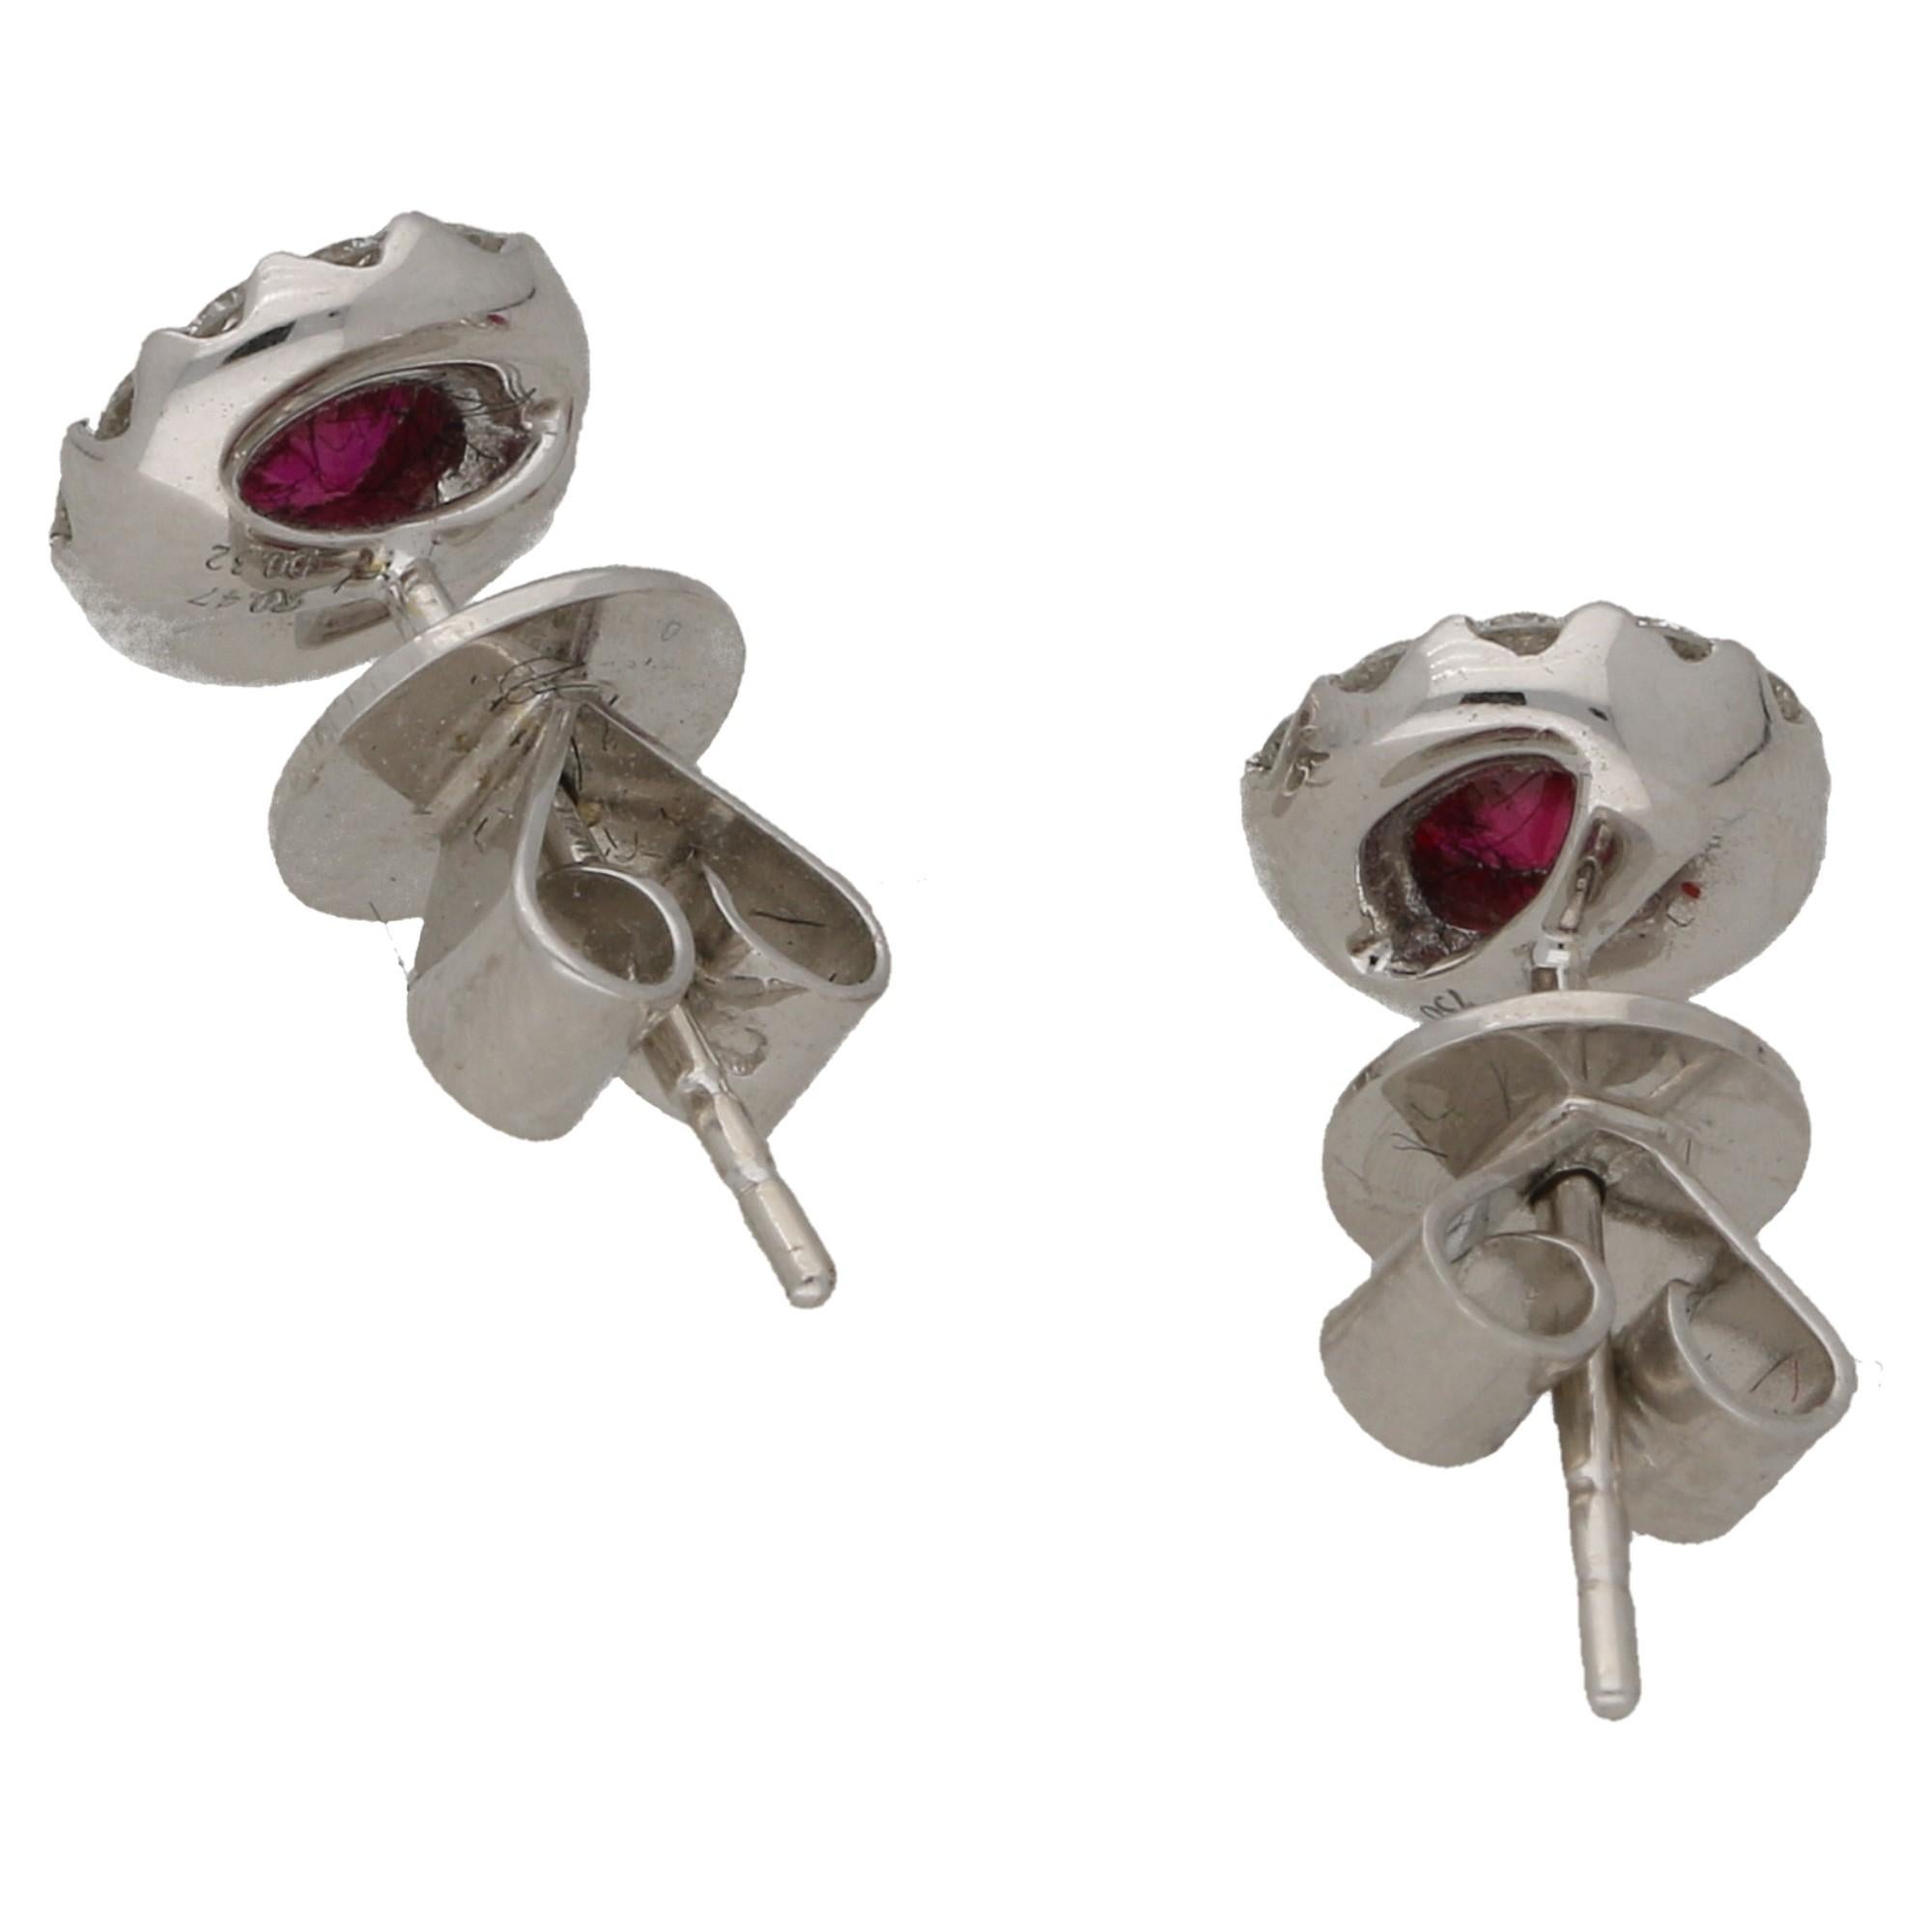 A pair of ruby and diamond cluster studs in hallmarked 18ct white gold. Ruby weight is approximately 0.47 carats and the diamond is approximately 0.32 carats total, G/H colour VS clarity. These are fitted with secure butterfly fittings.